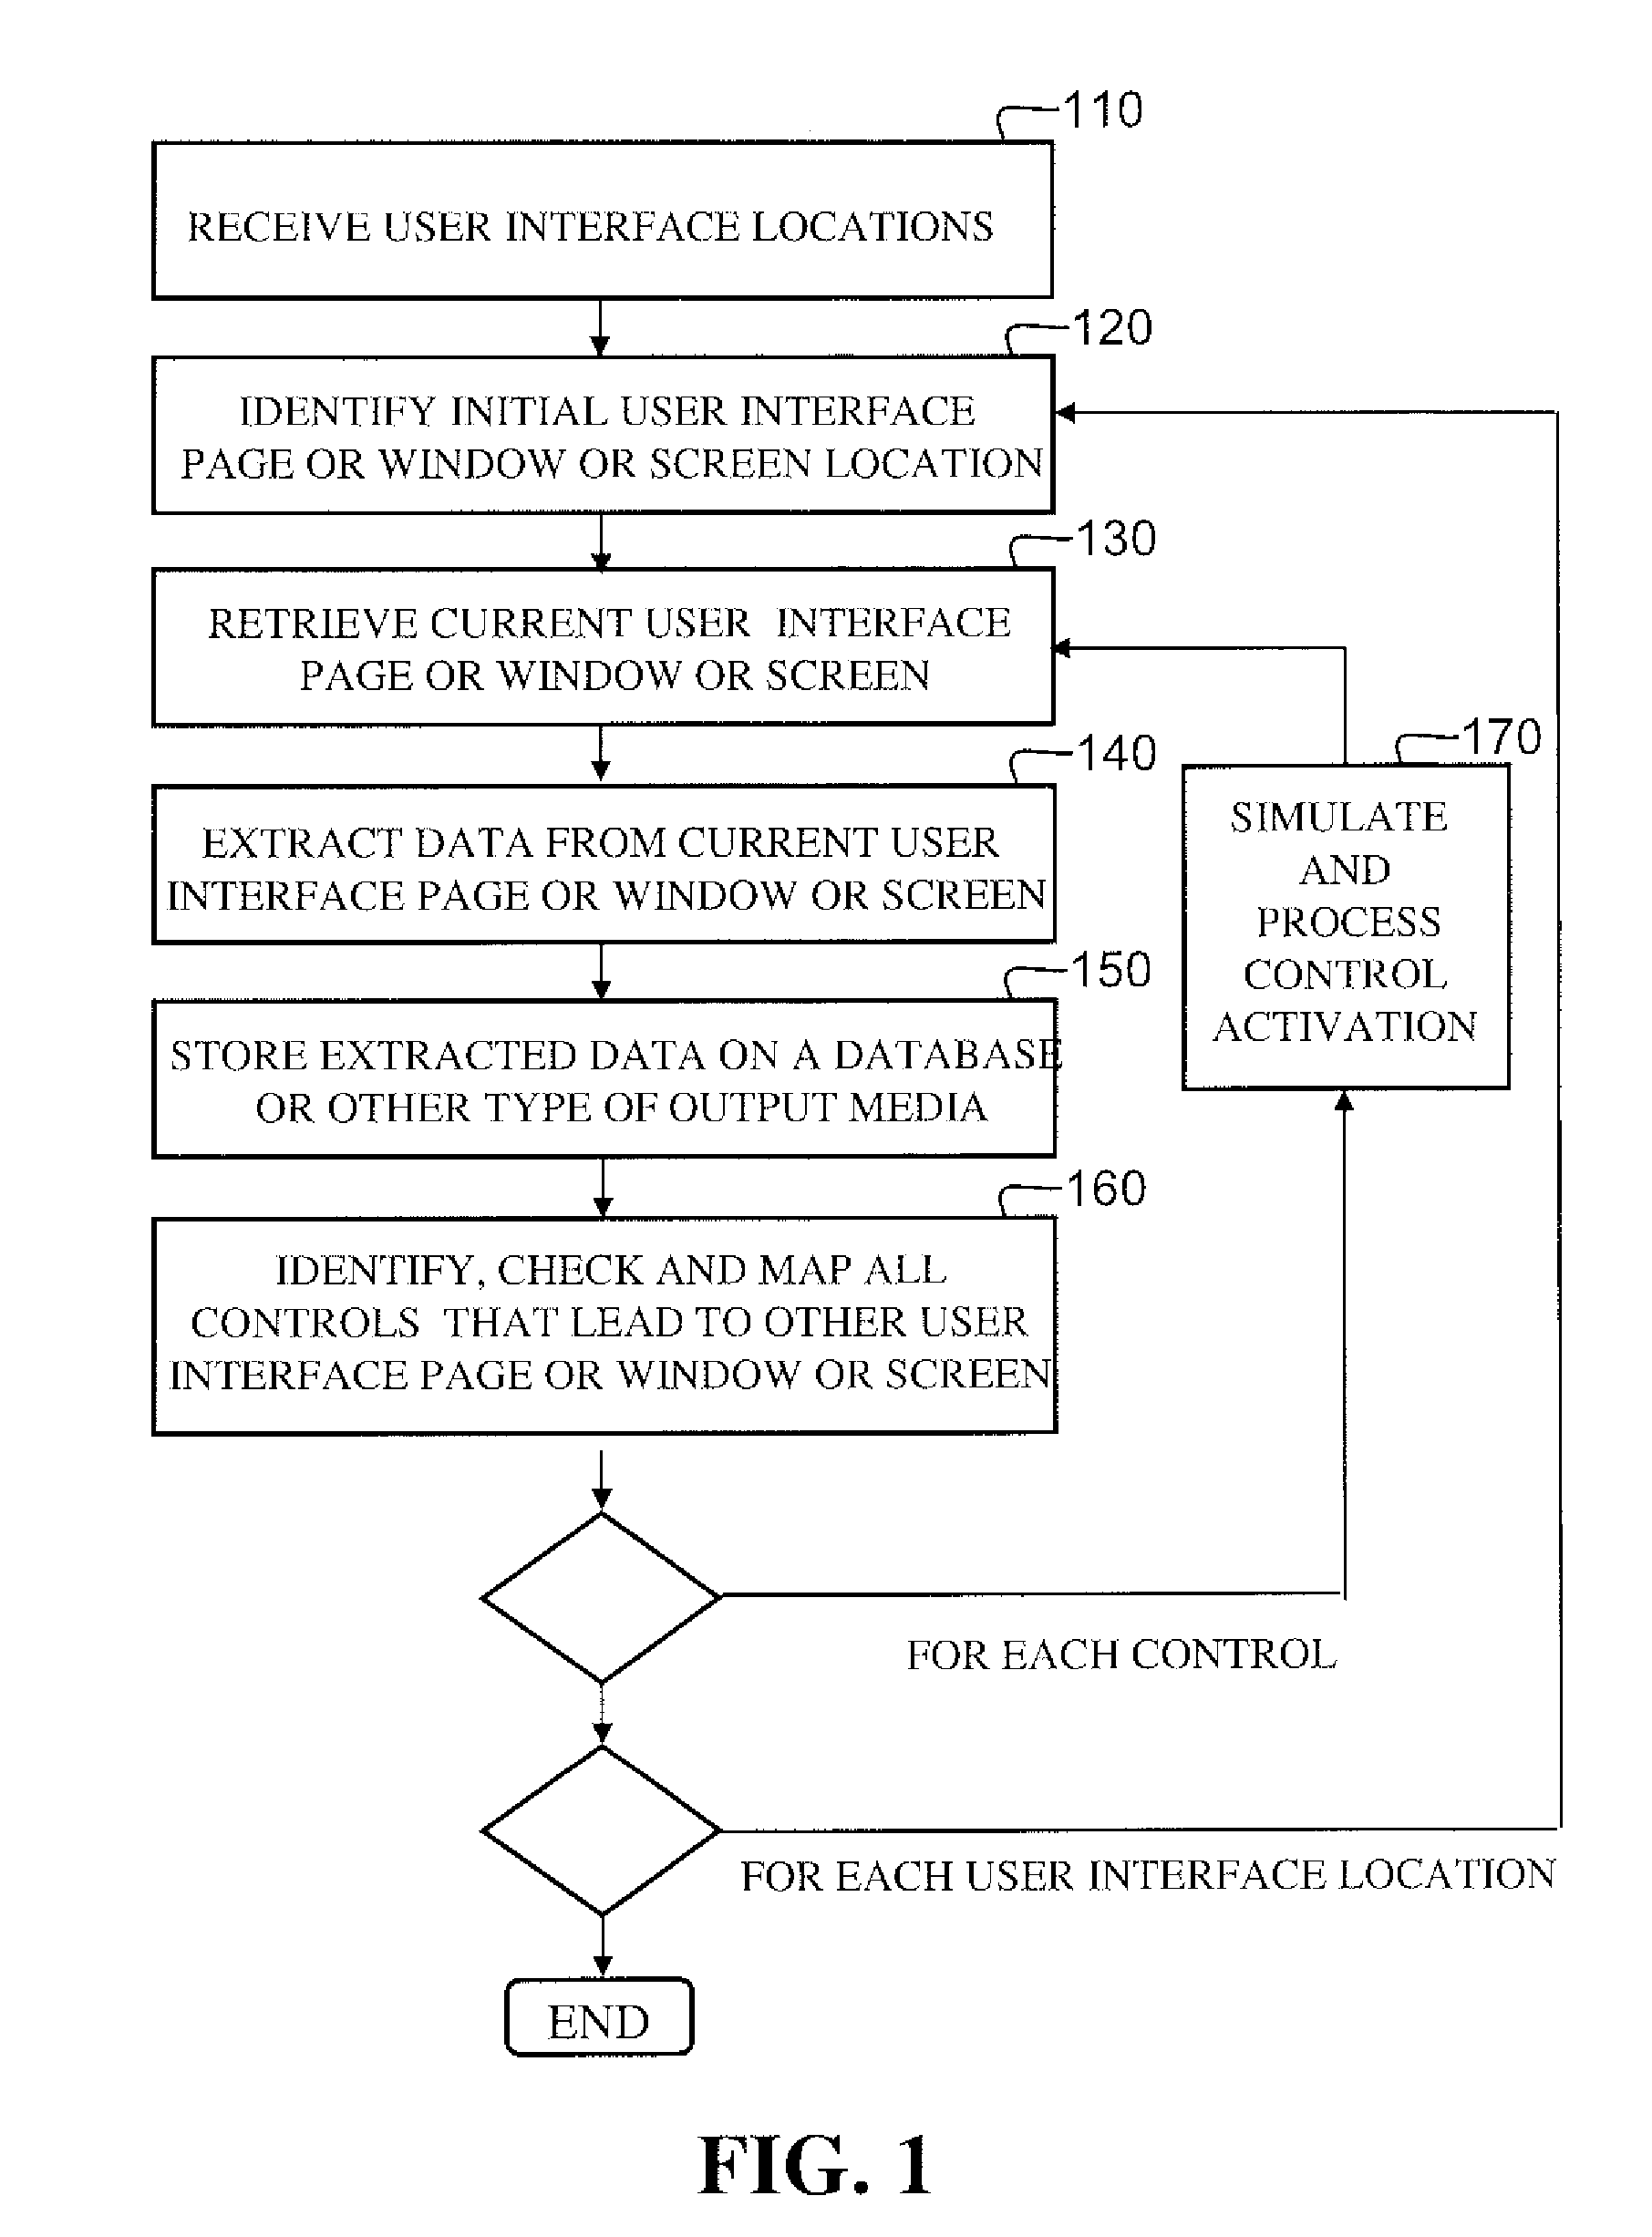 Extracting business logic from the user interface of service and product oriented computerized systems